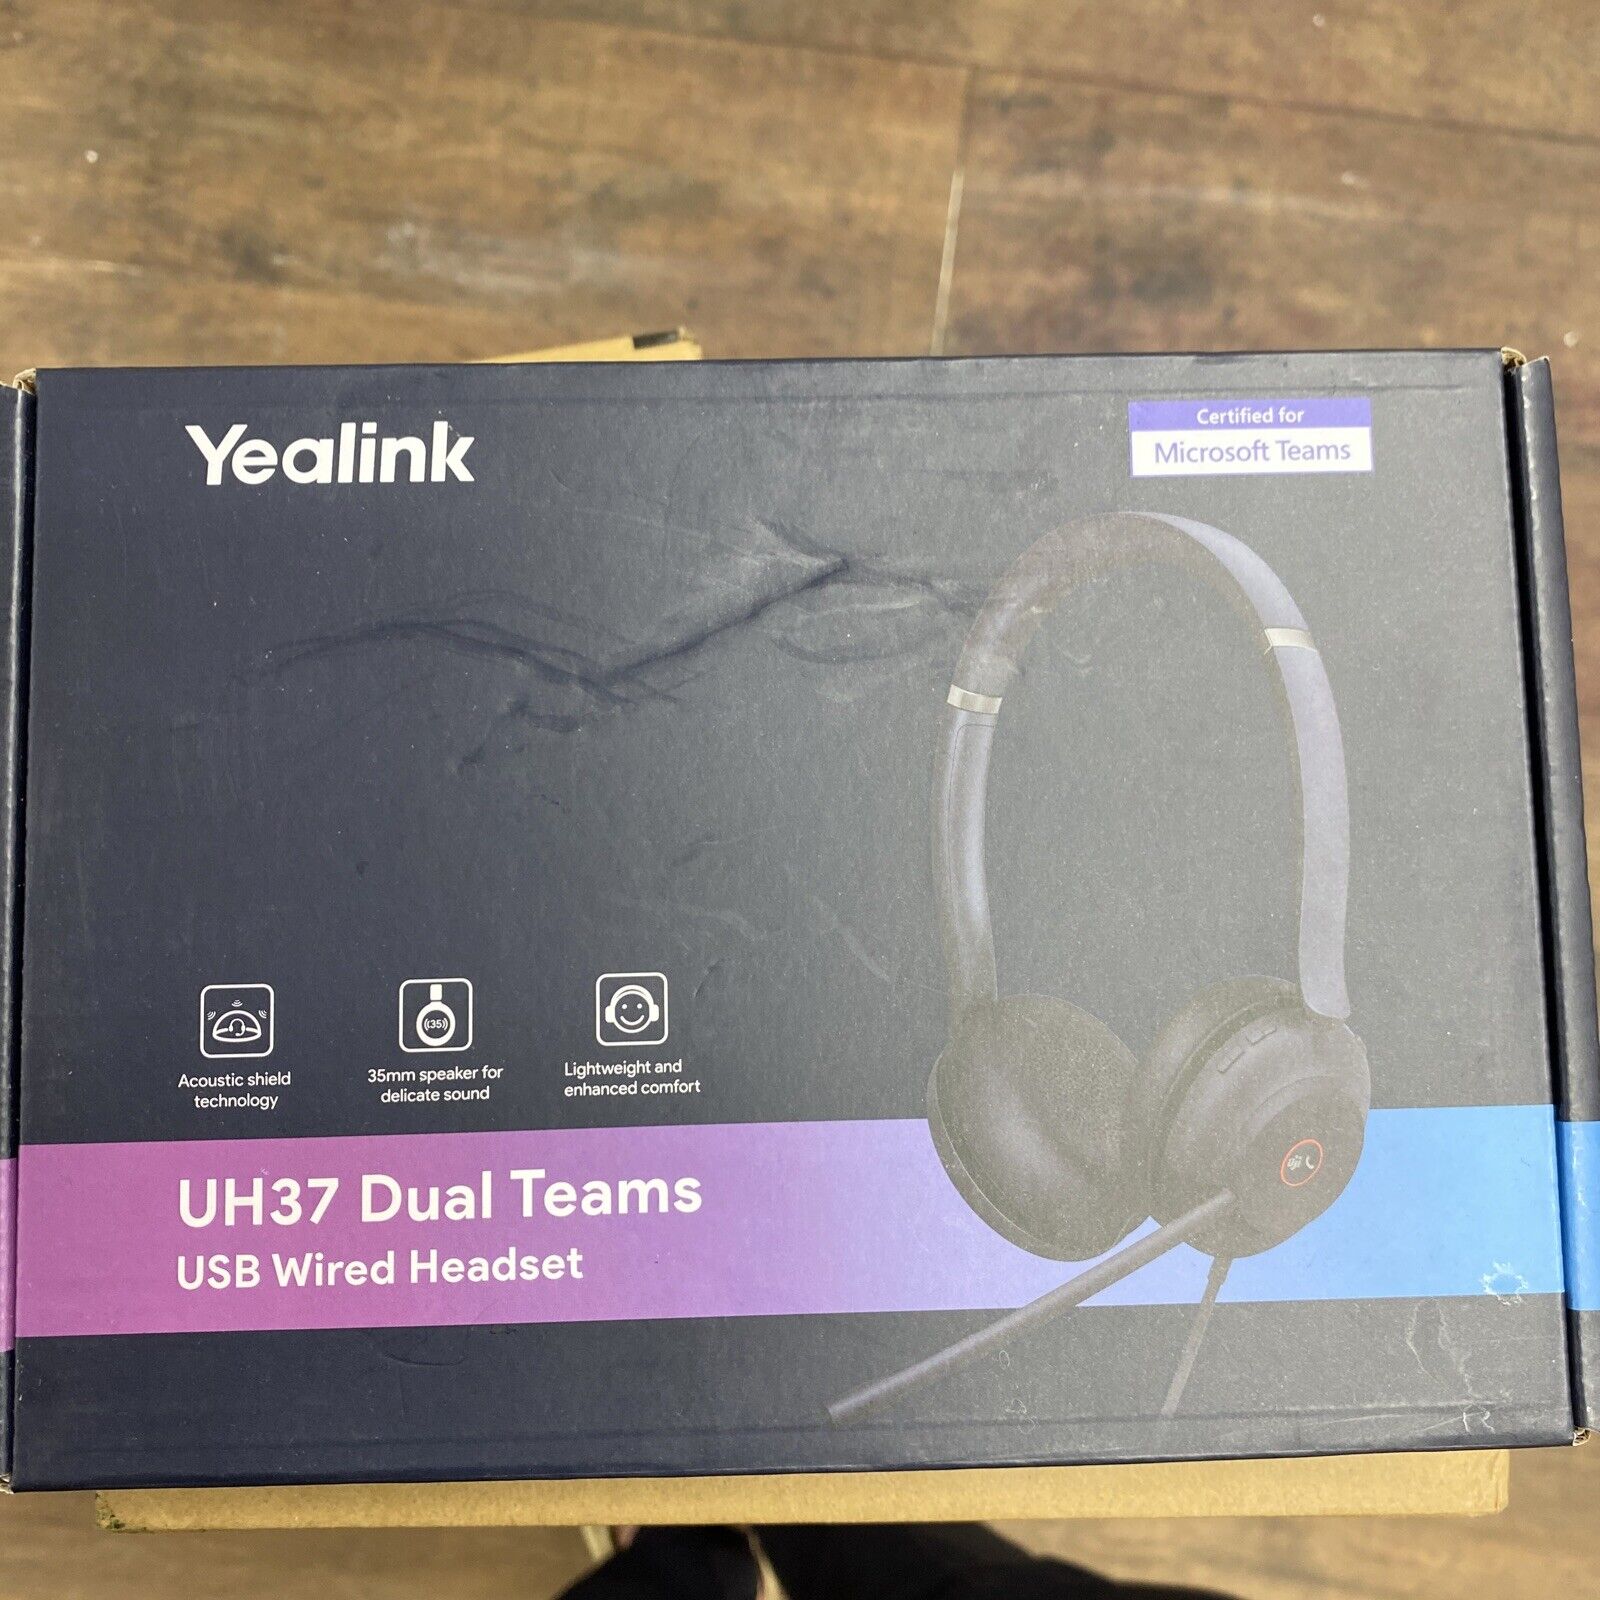 Yealink 1308100 Uh37-dual-teams - Yealink Usb Wired Dual Headset - Certified For